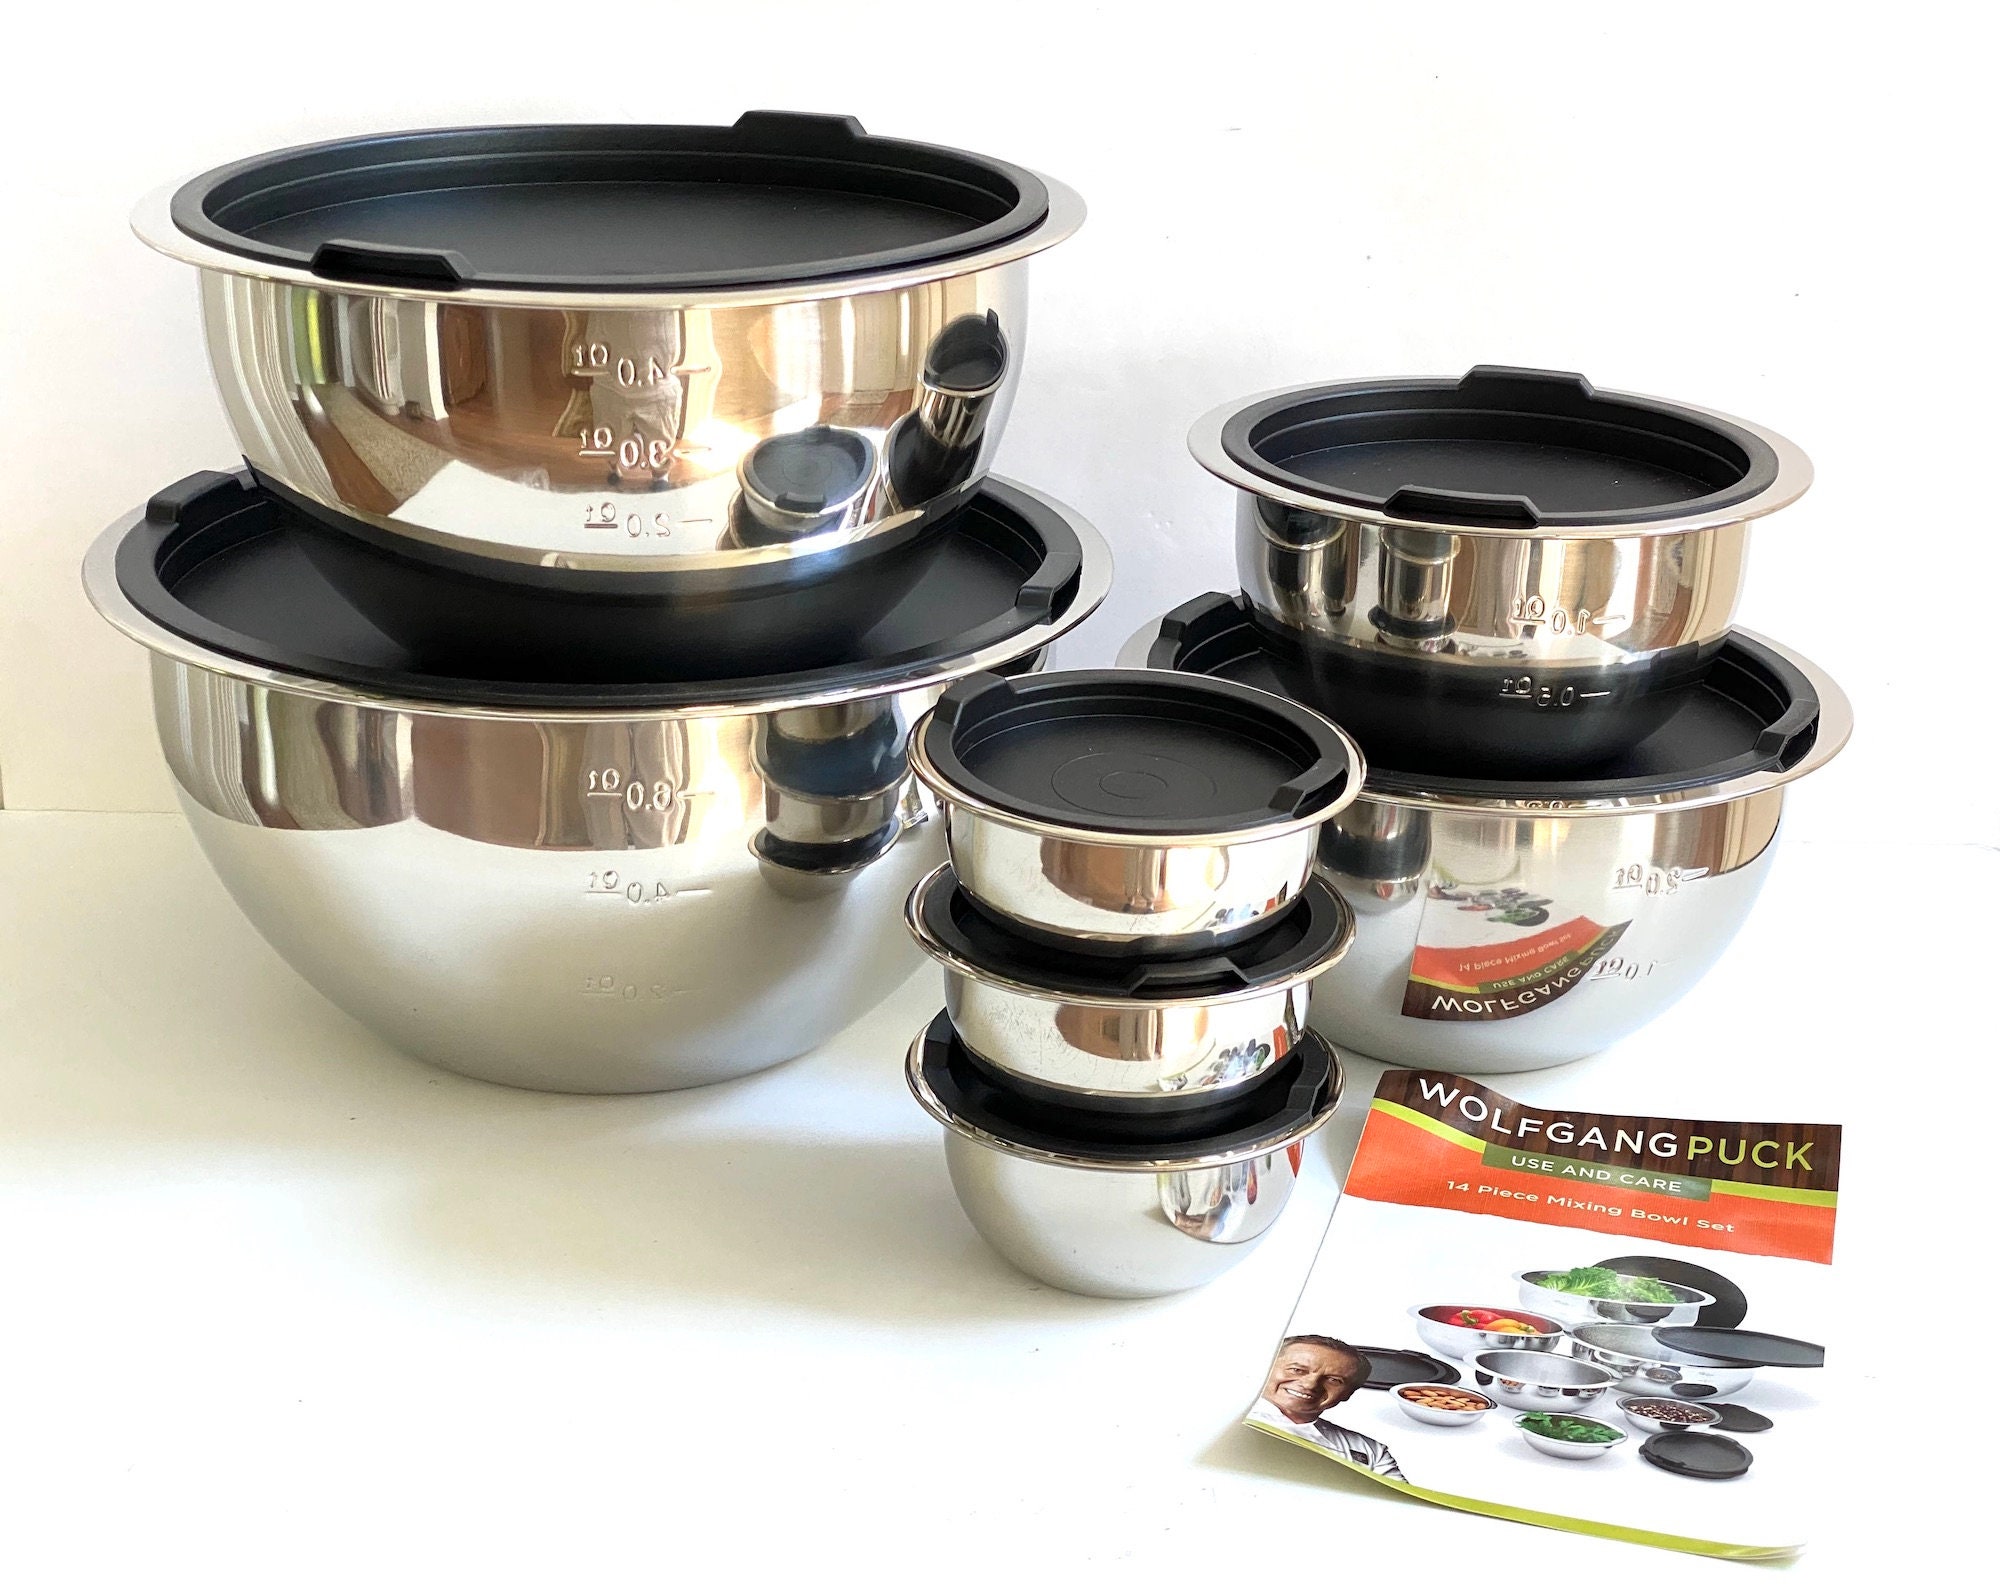 Wolfgang Puck 15-Piece Stainless Steel Cookware Set and Mixing Bowls